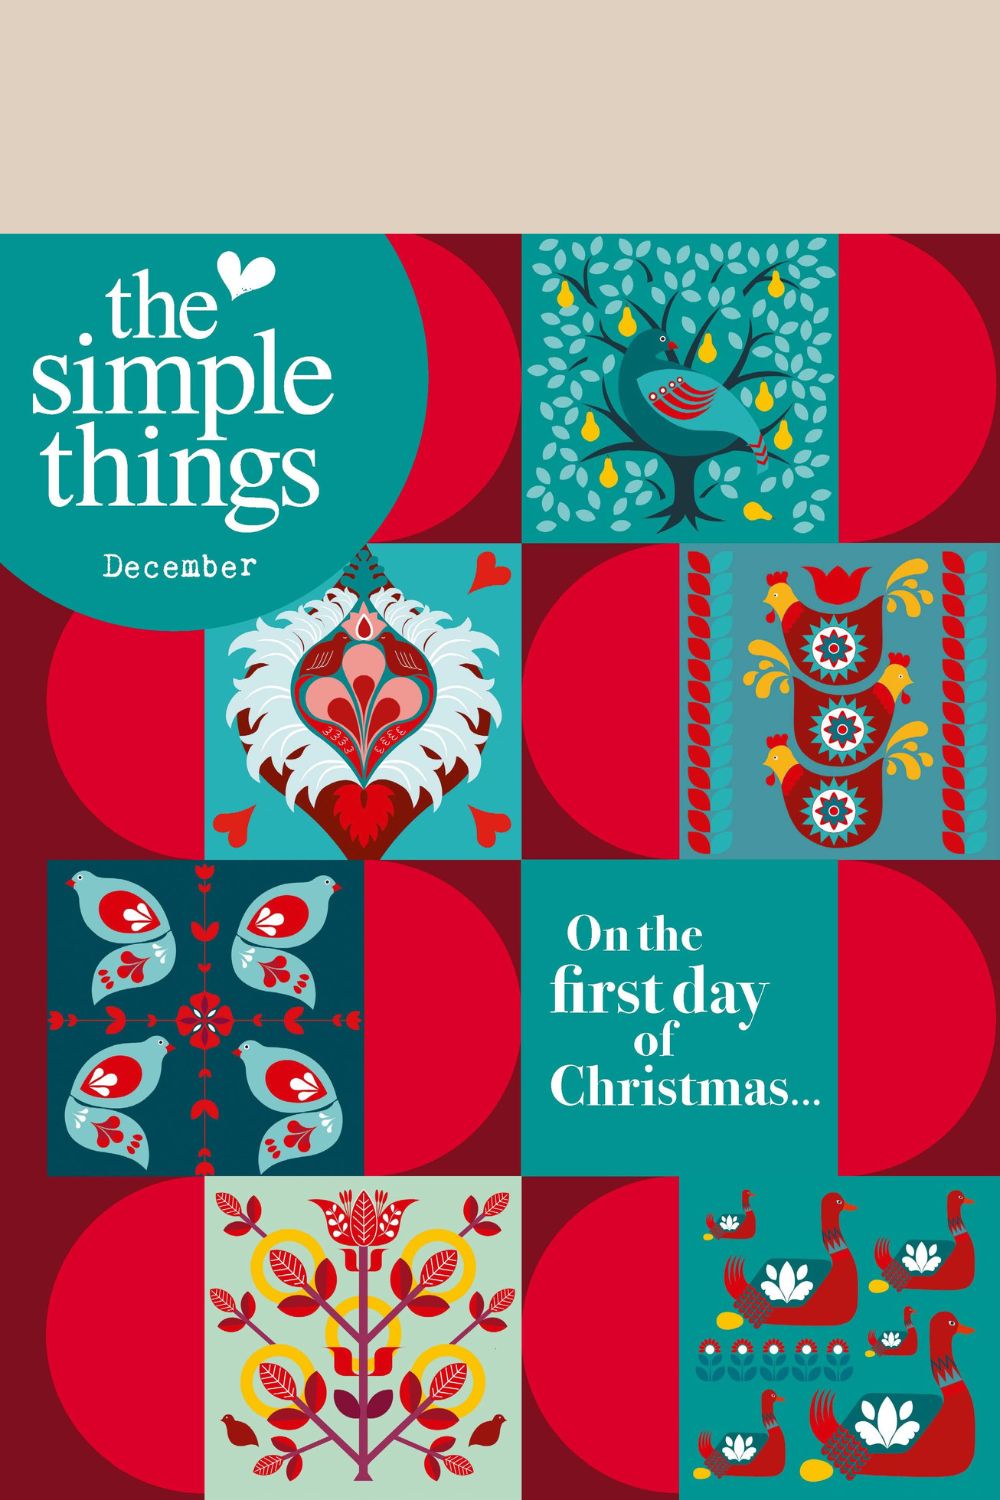 The Simple Things December 2022 issue